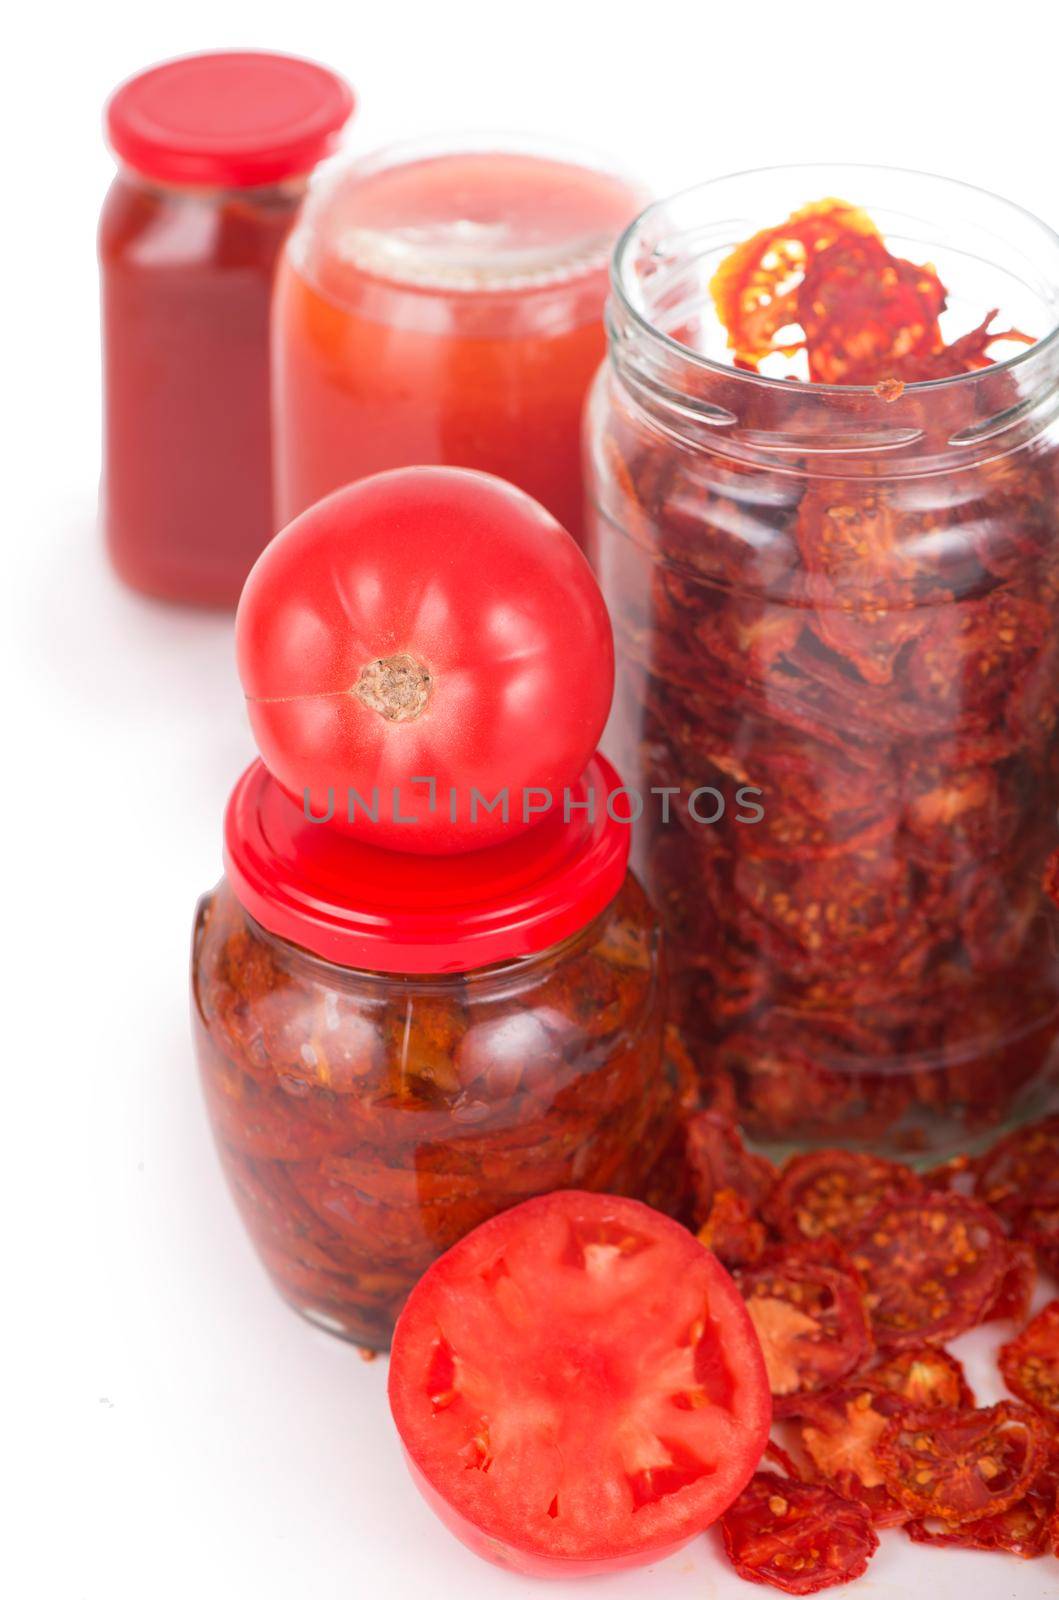 Bowl of sun dried tomatoes on wooden background, top view